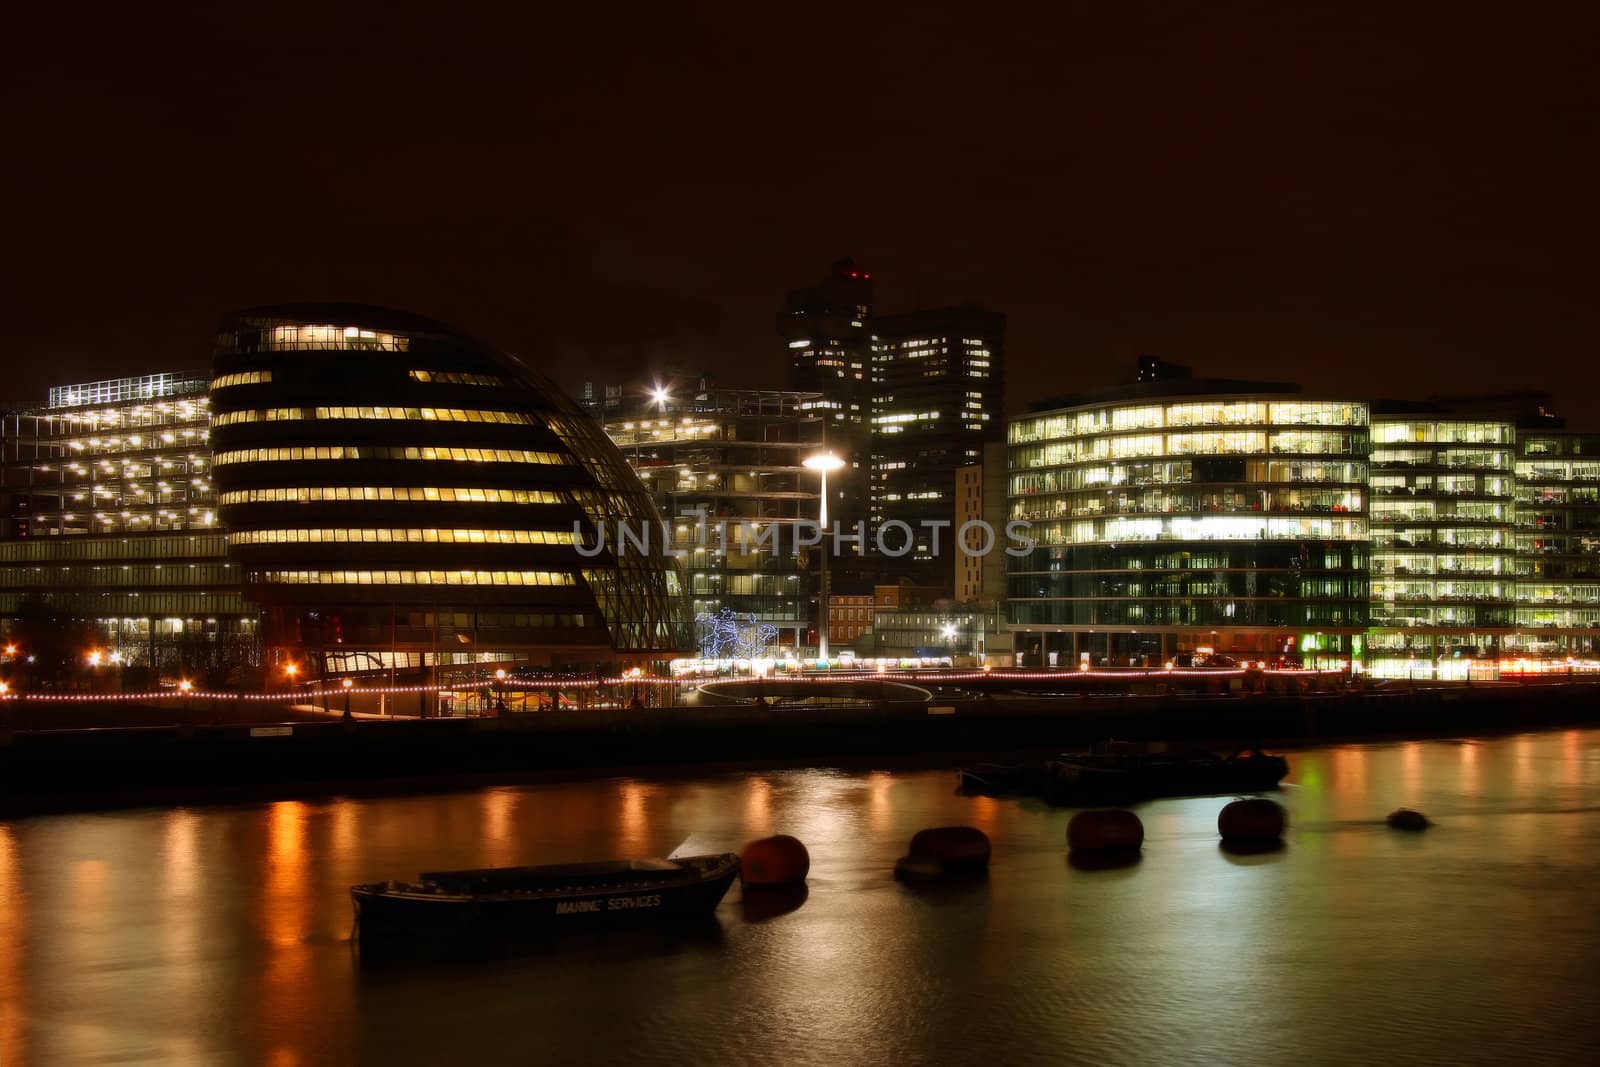 London night by the river Thames